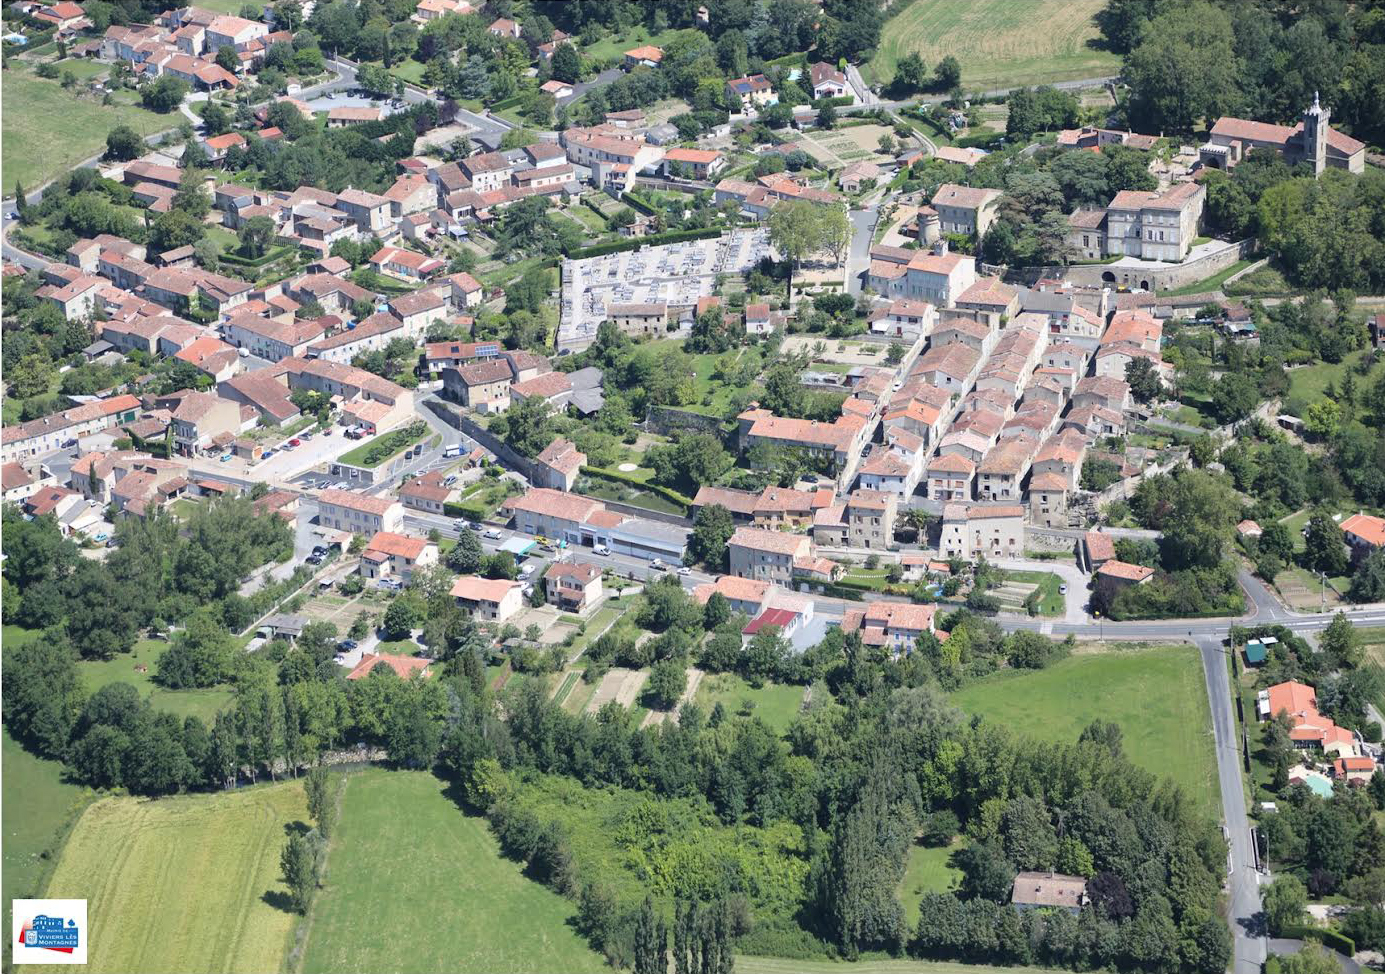 Viviers-lès-Montagnes, one of the last bastides in the Tarn - Towns, Villages and Bastides in Viviers-lès-Montagnes